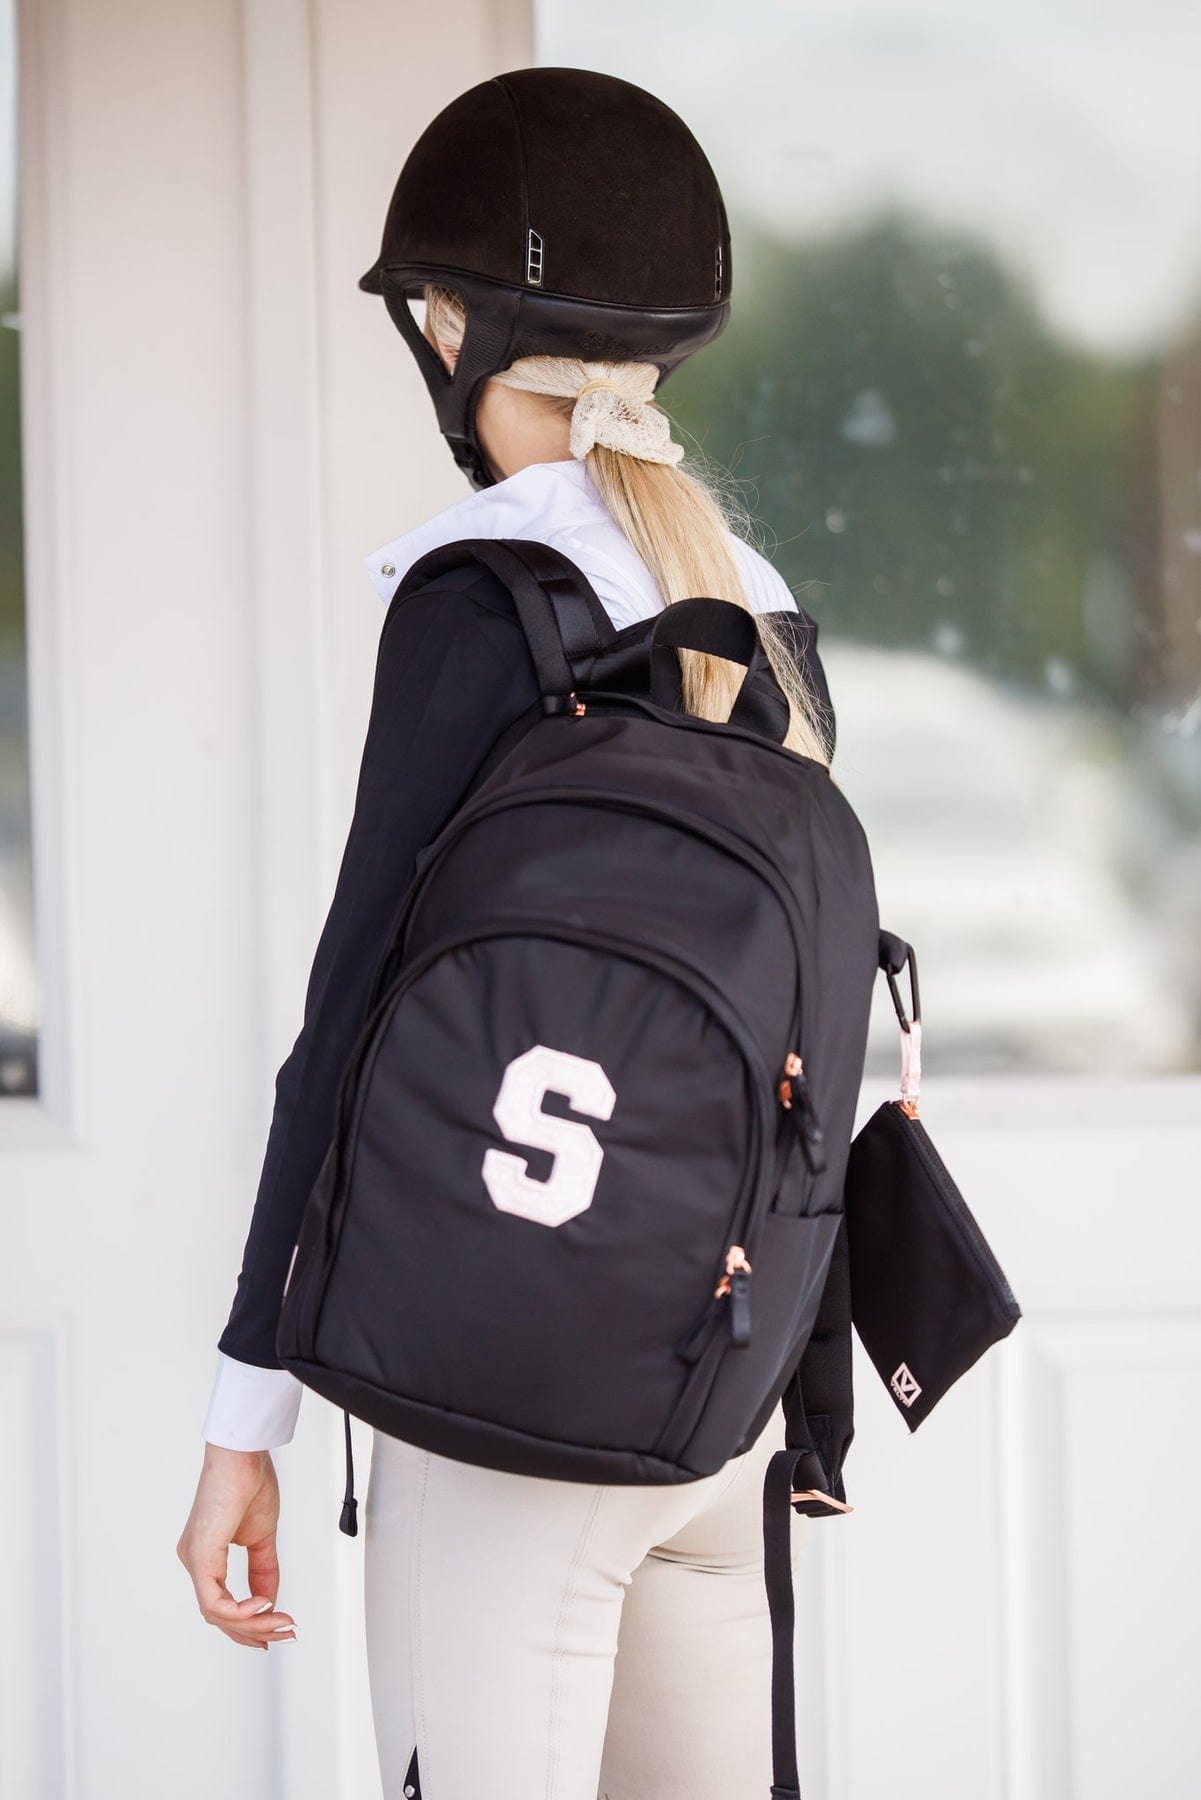 Veltri Backpacks Veltri- Helmet Backpack (Customize W/Letters or Numbers) equestrian team apparel online tack store mobile tack store custom farm apparel custom show stable clothing equestrian lifestyle horse show clothing riding clothes horses equestrian tack store